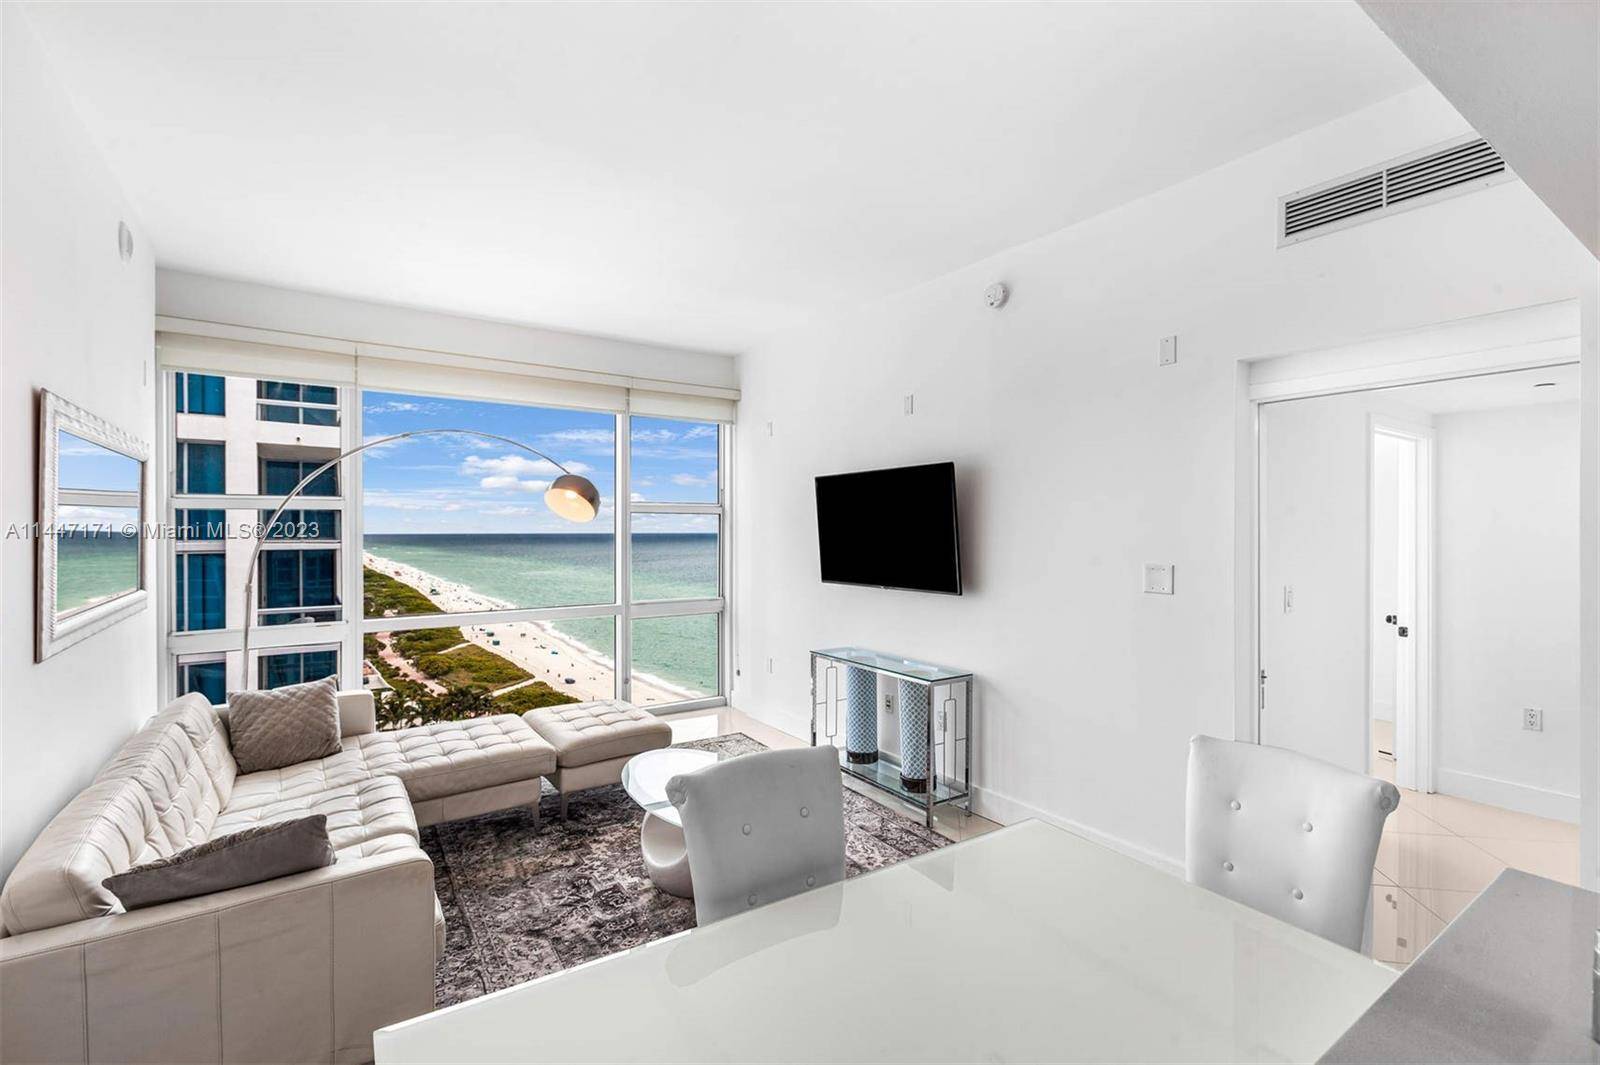 Welcome to Penthouse 11, located at Miami Beach s Carillon wellness resort.